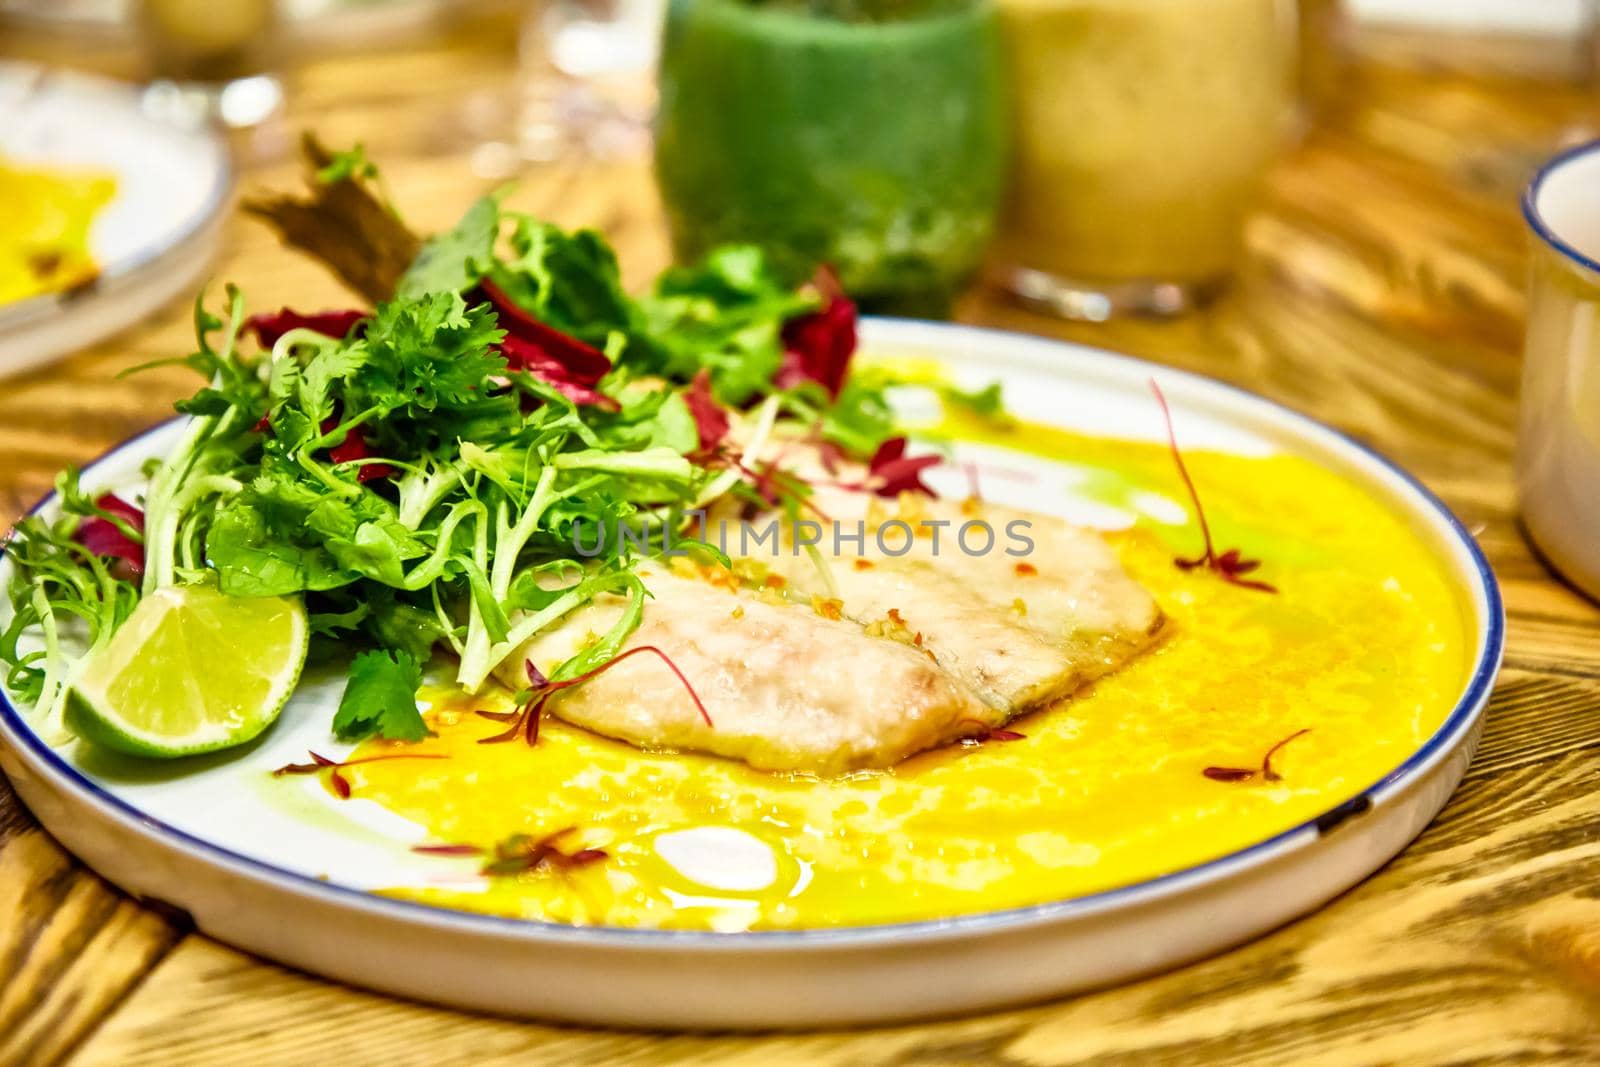 Fried fish with parsley, lettuce and sauce is on the plate by Milanchikov